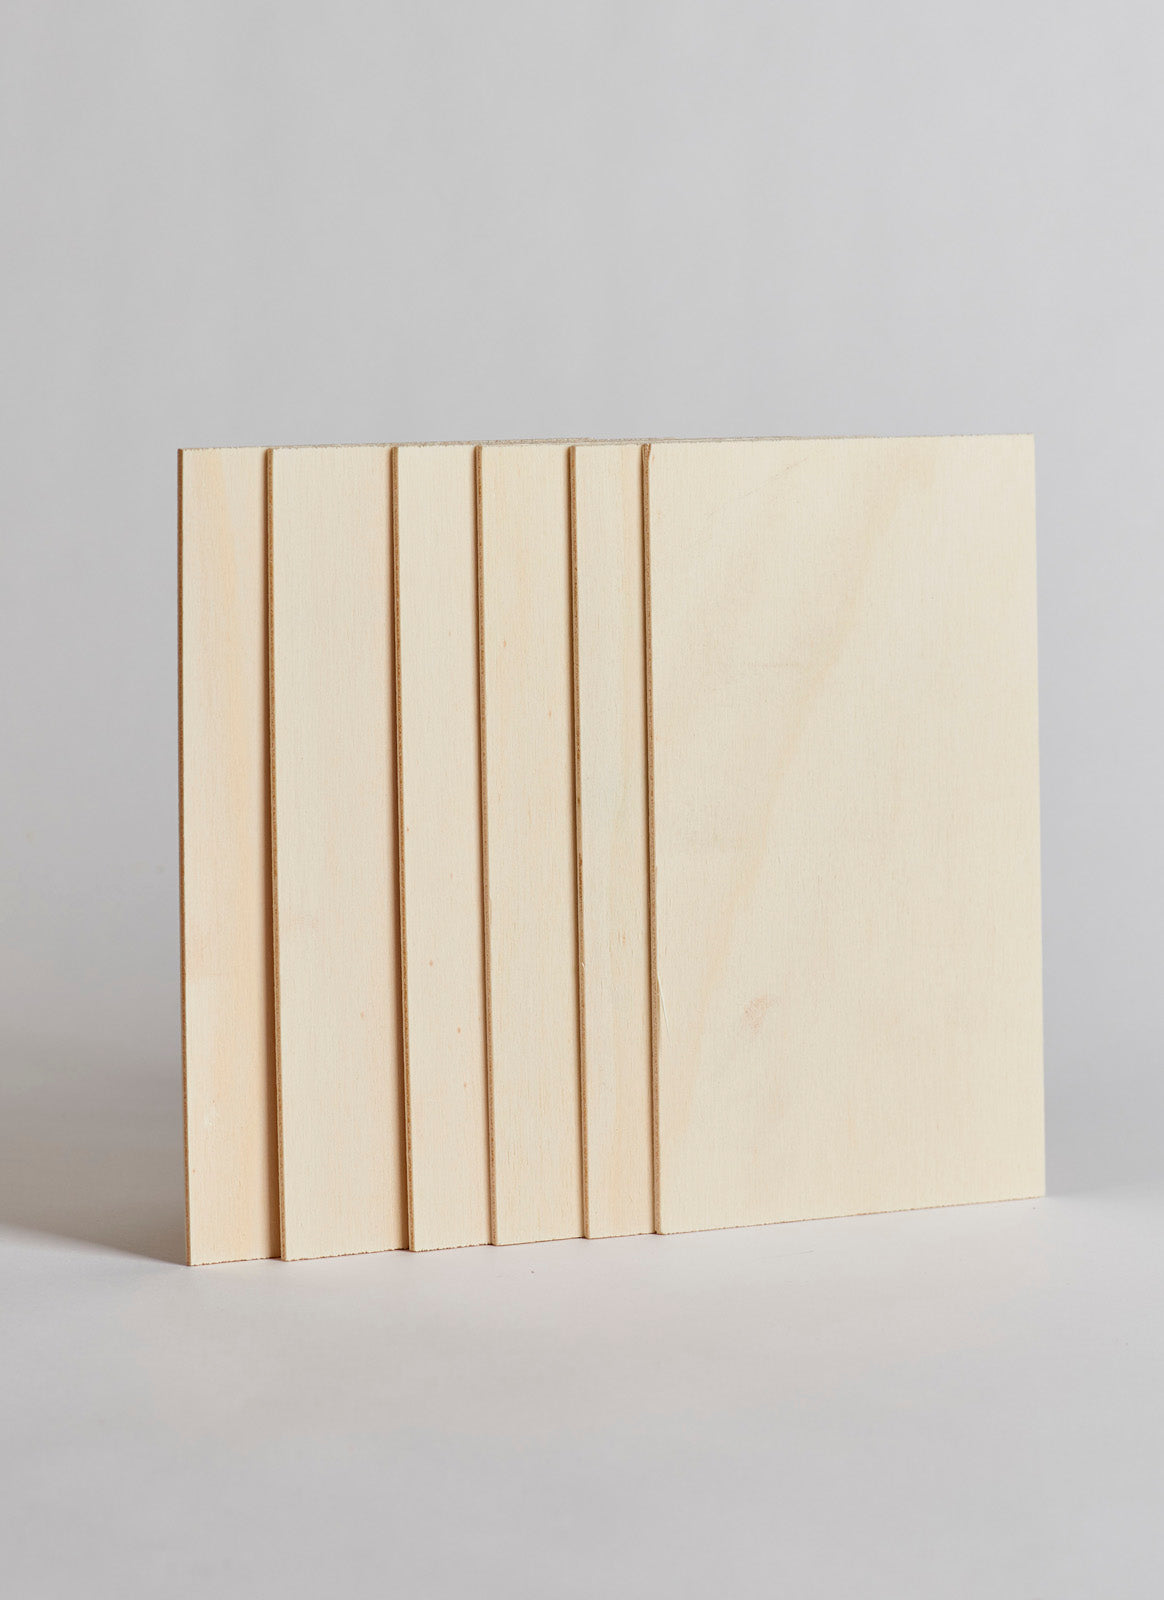 Plyco's 3mm Poplar Craft Pack, containing six sheets, on a white background